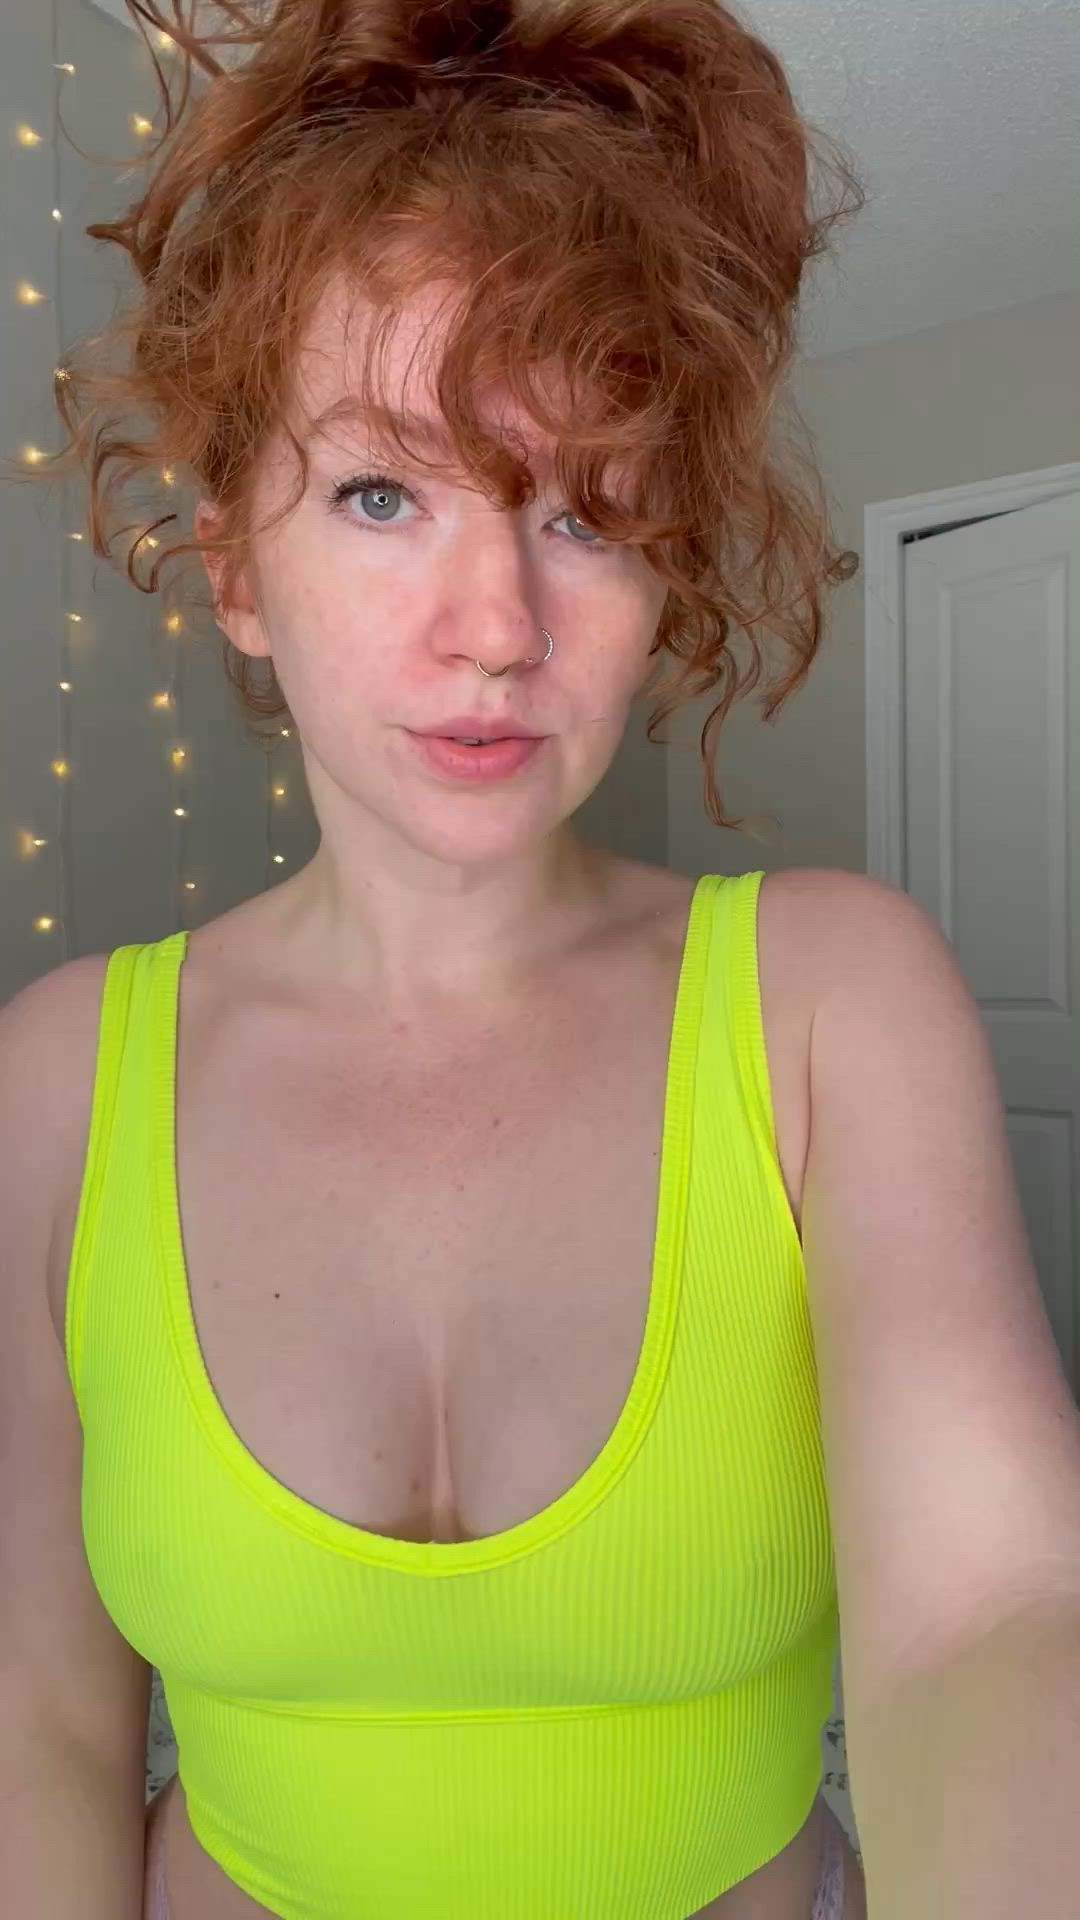 Amateur porn video with onlyfans model gidgegidge <strong>@sexyshmexie</strong>